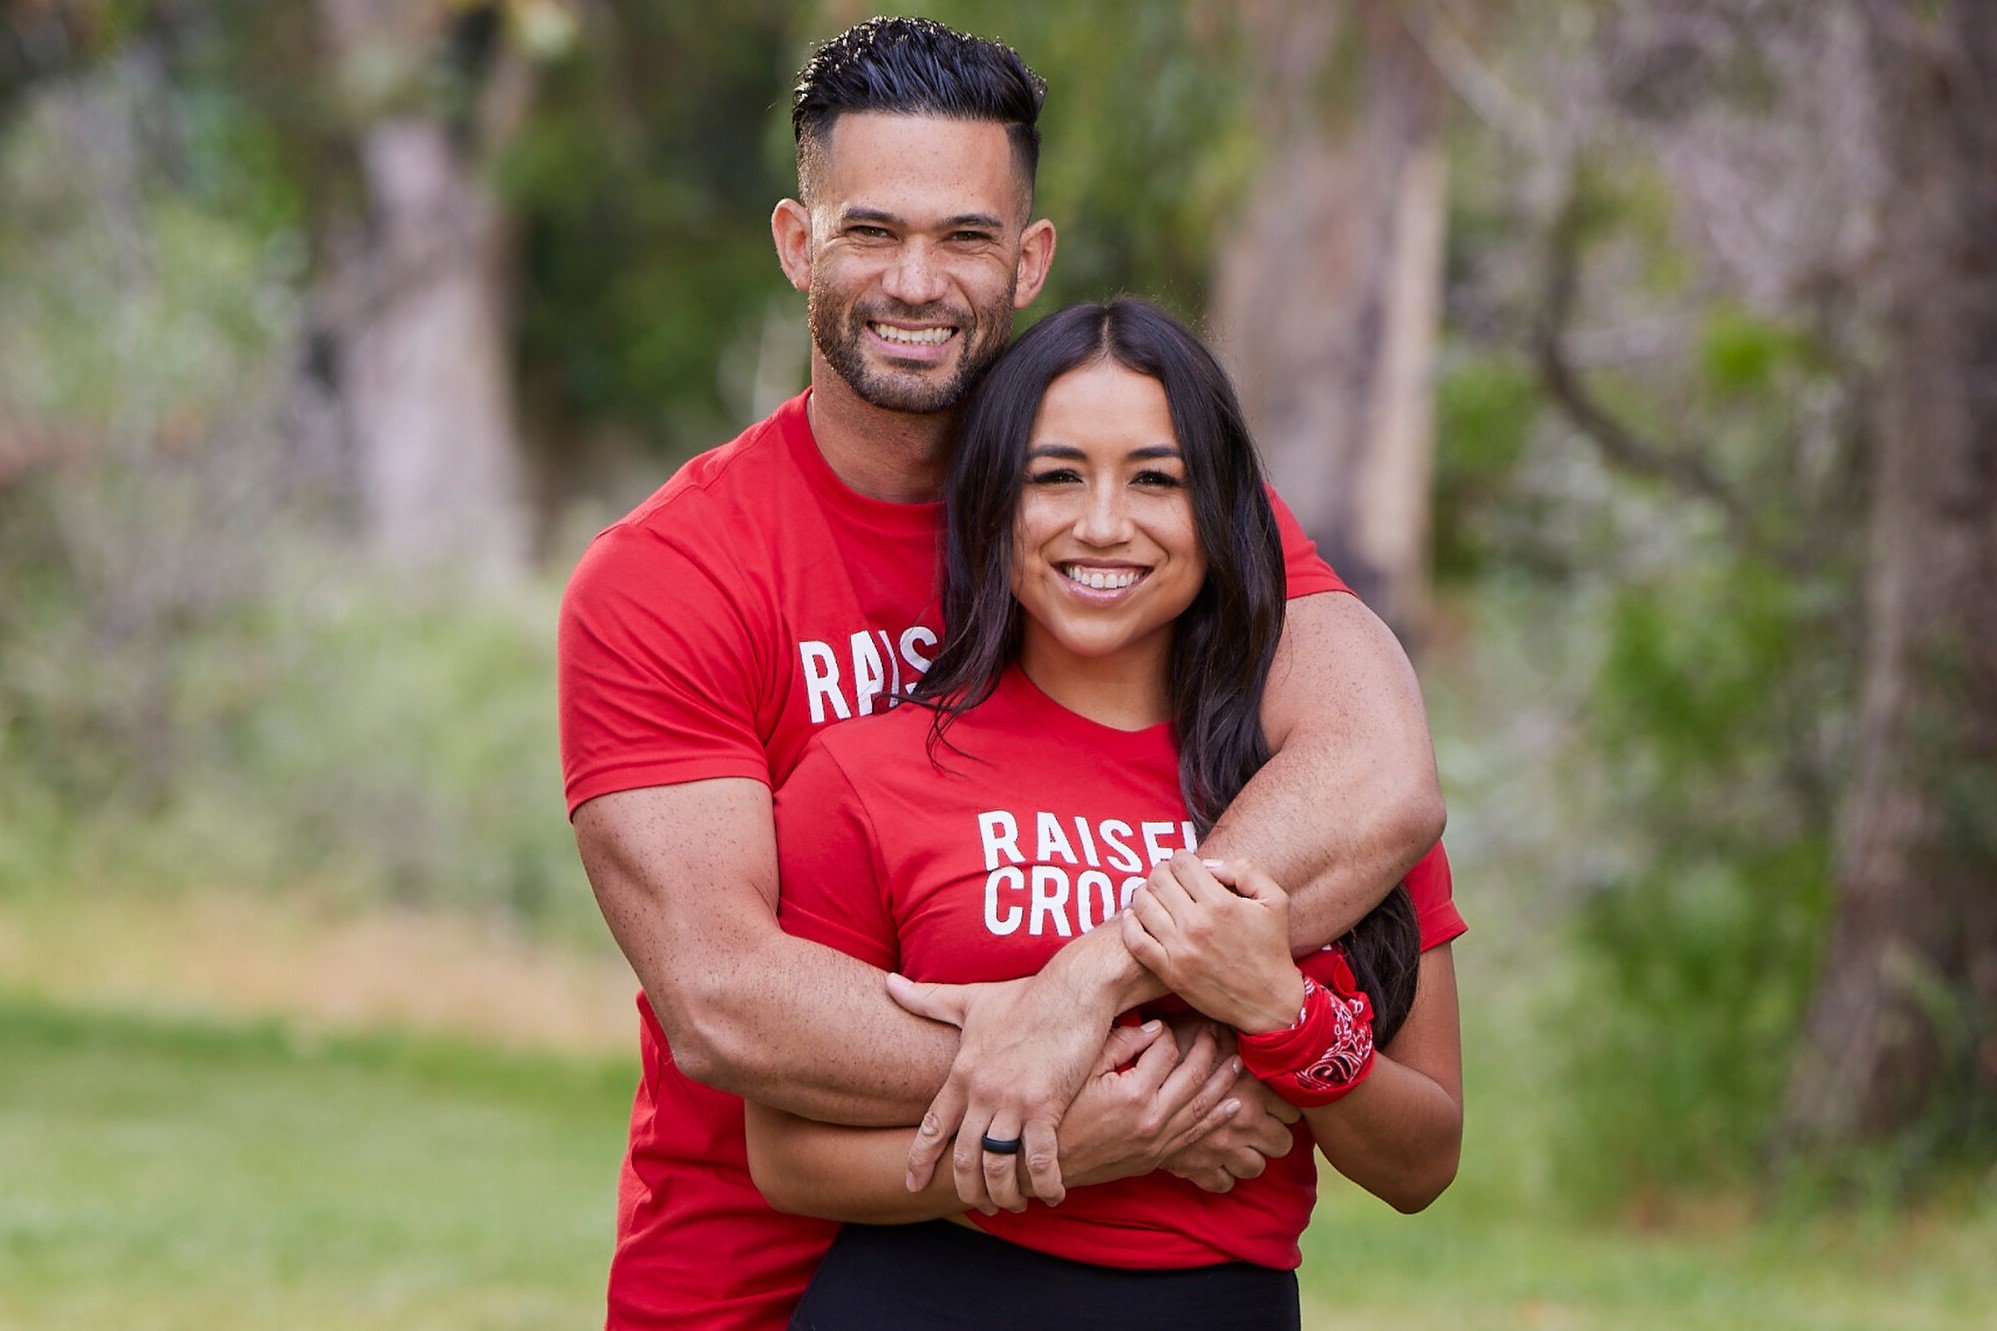 Luis Colon and Michelle Burgos, who star in 'The Amazing Race 34' on CBS, pose for promotional photos.